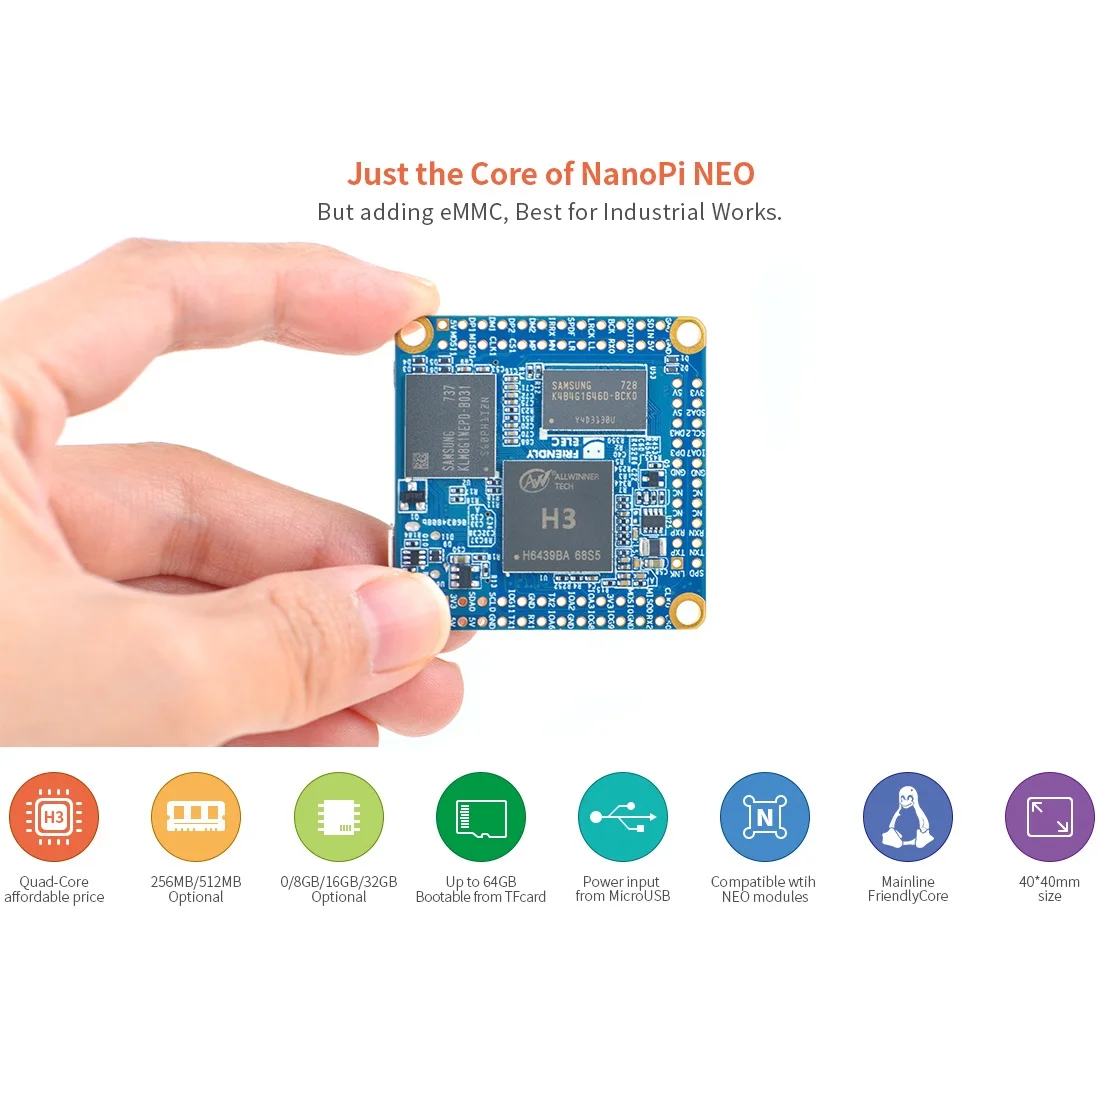 NanoPi Neo Core Kit 256M DDR RAM/4G eMMC Allwinner H3 Quad Cortex-A7 Up 1.2GHz,OpenWRT,with heat sink,solder the pin-header lcd 5110 dc2 7 3 3v lcd module with pin header 84x84 nokialcd white screen display for arduino nokia 5110 lcd module